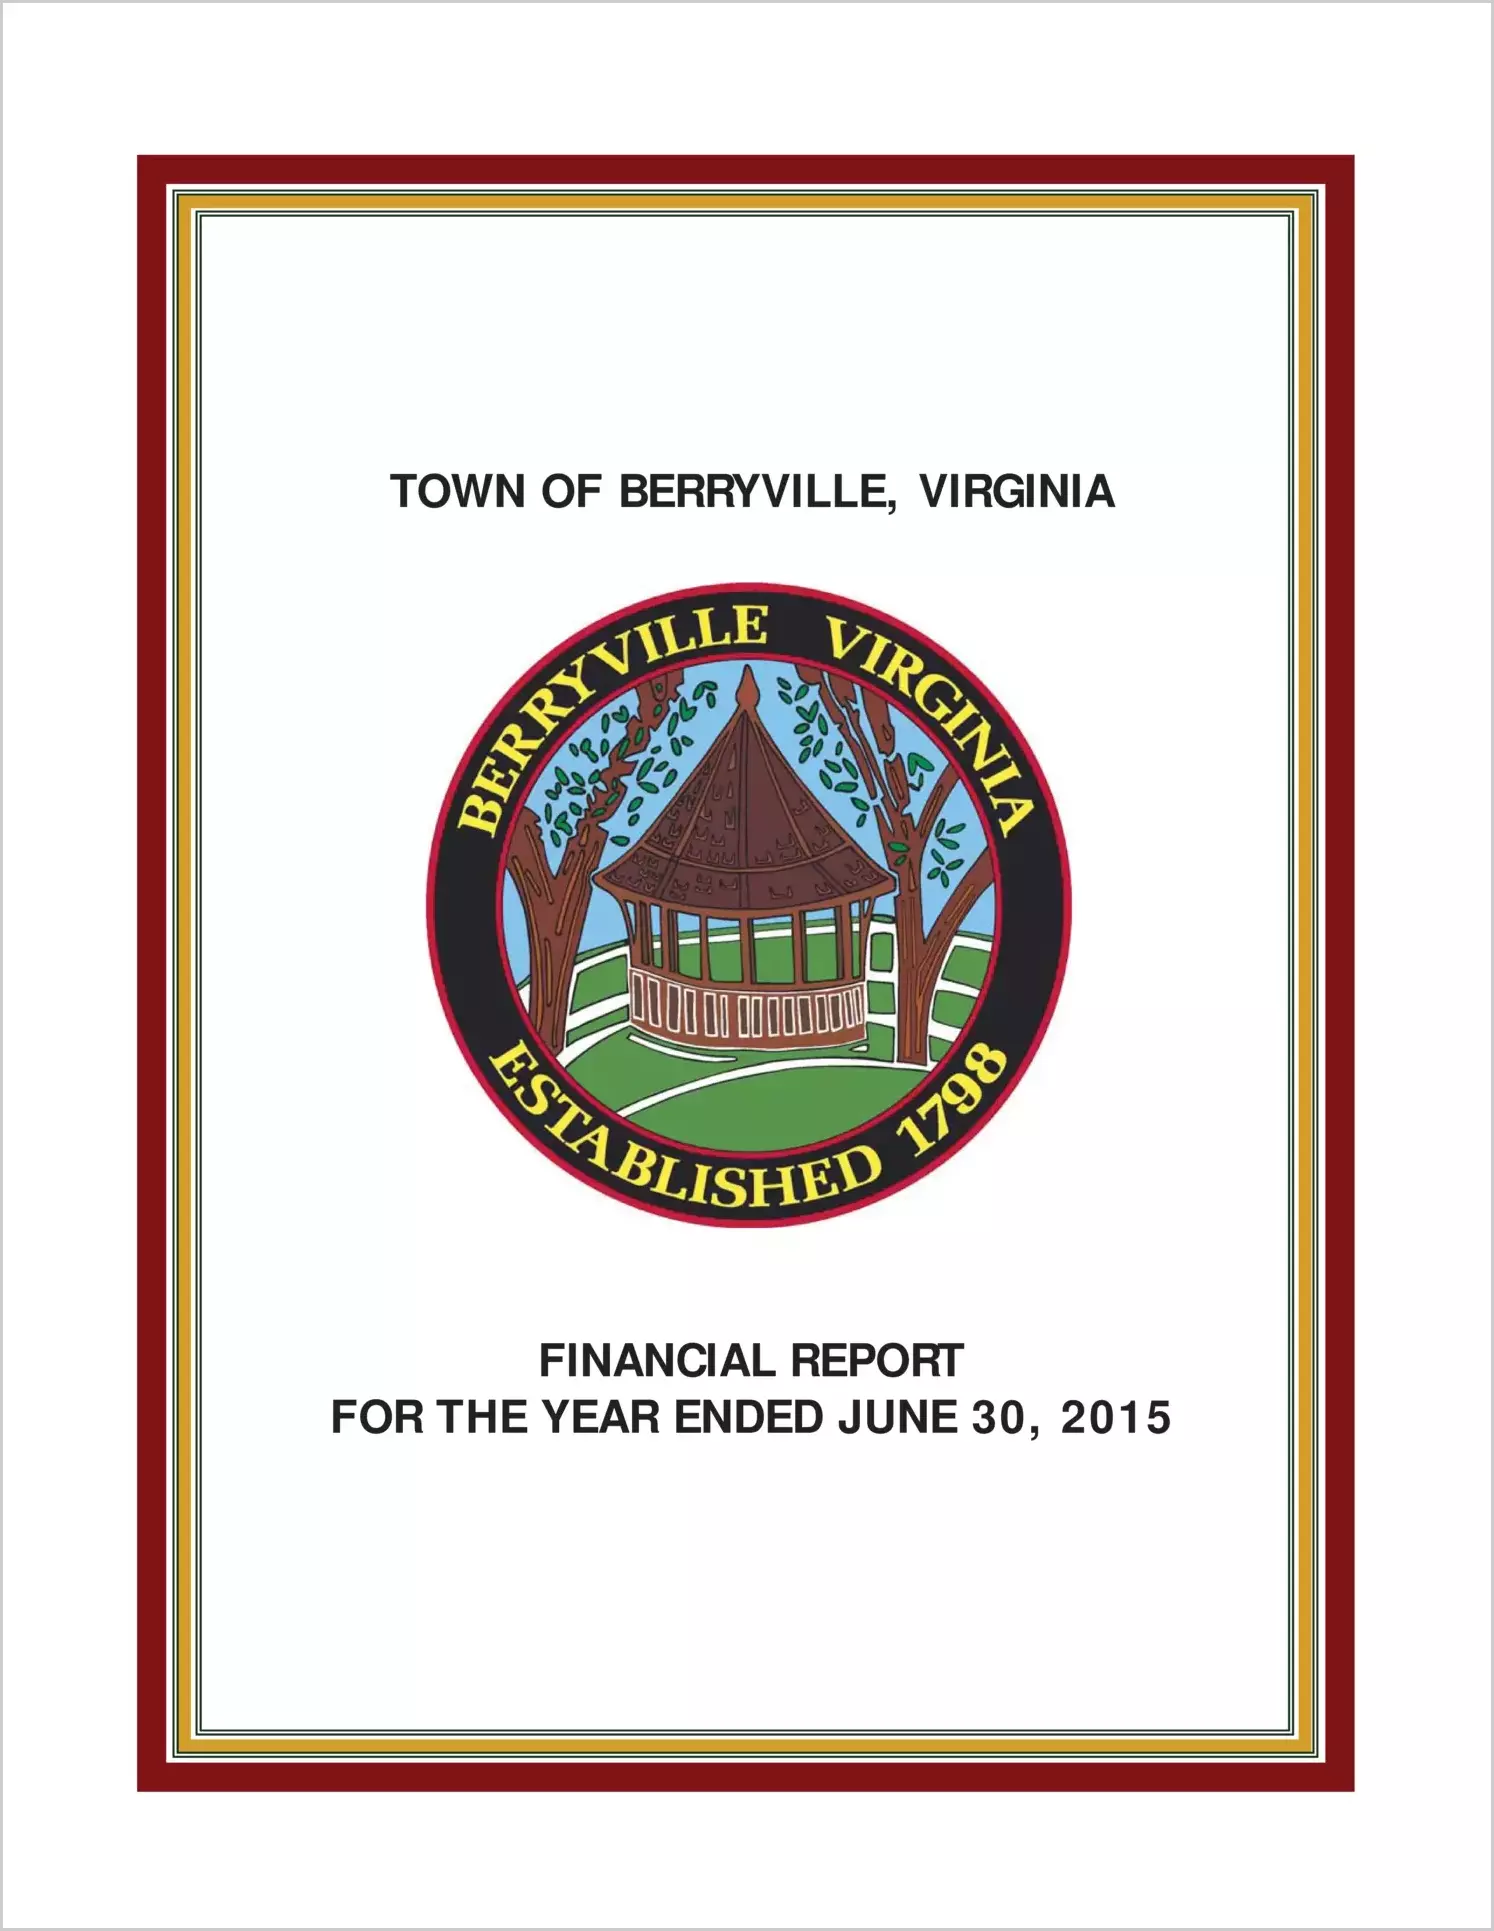 2015 Annual Financial Report for Town of Berryville